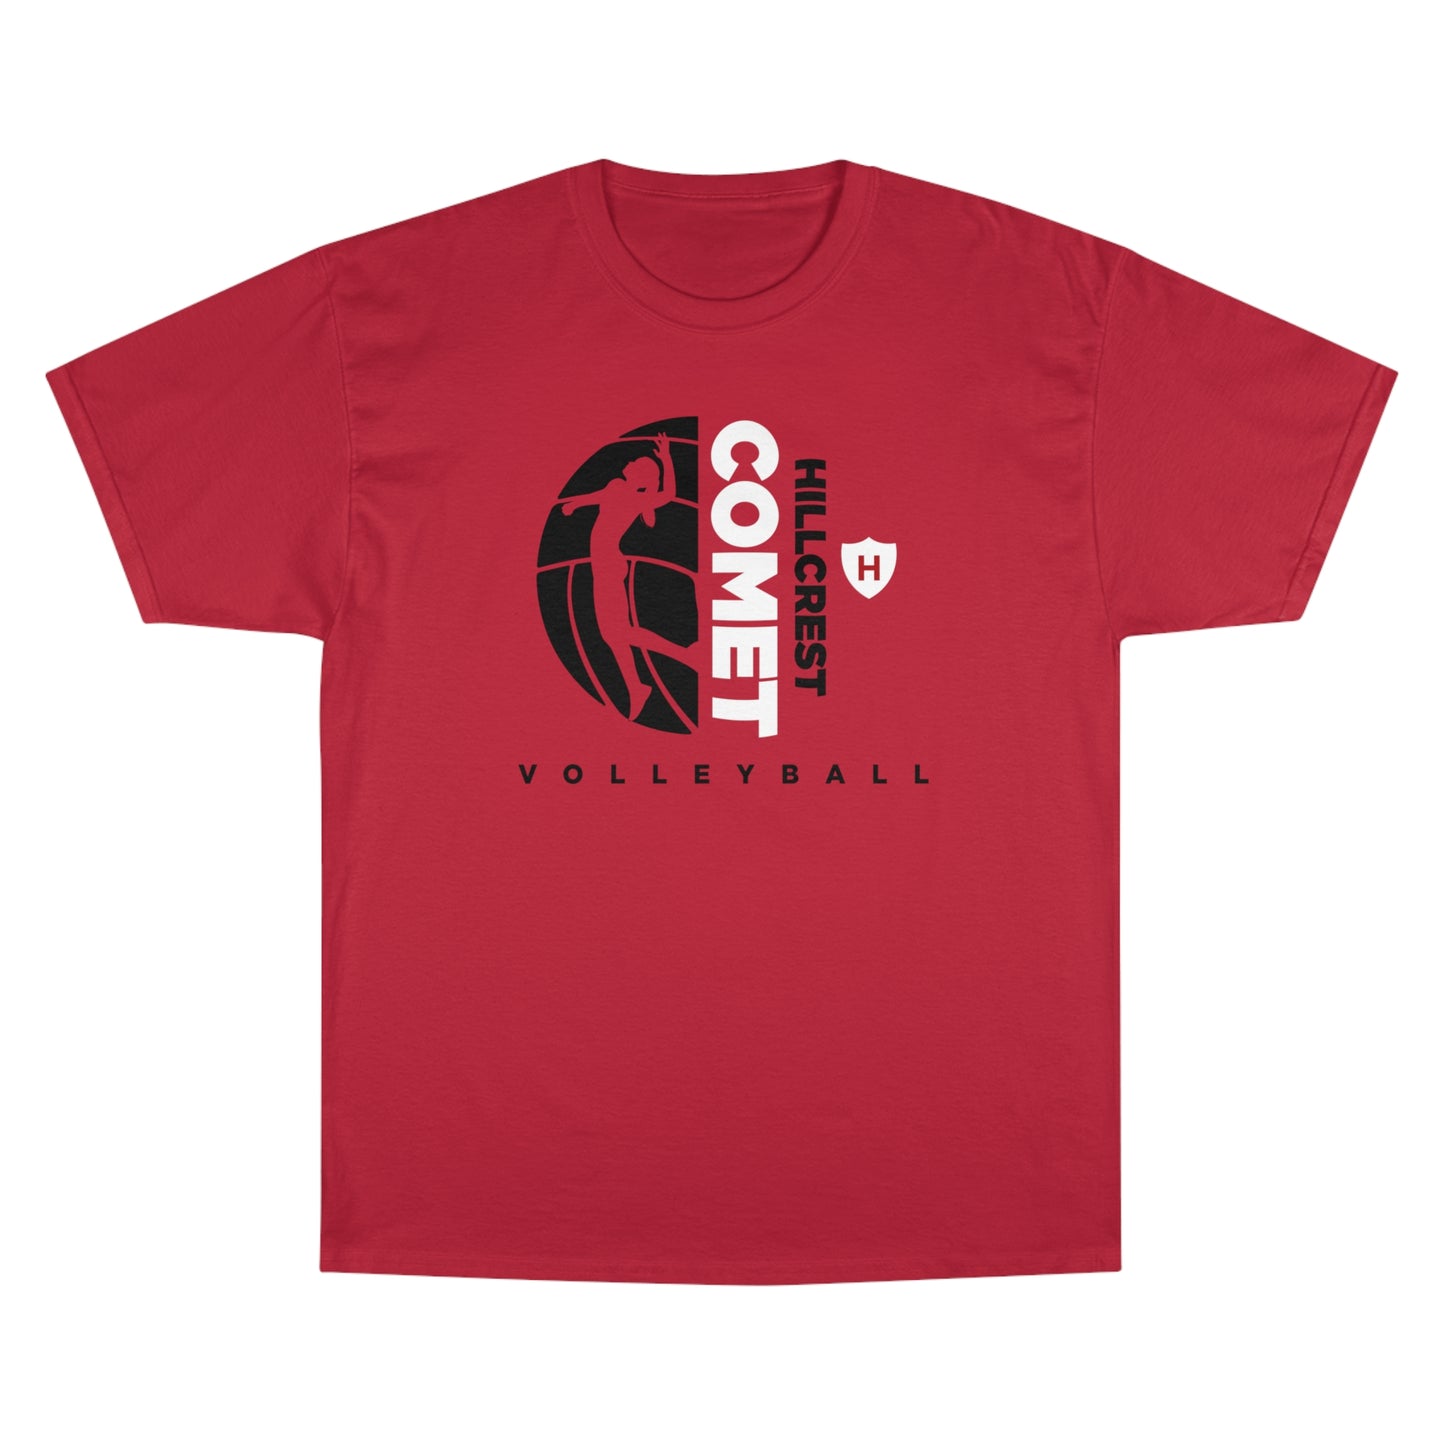 Comet Volleyball - Champion T-Shirt